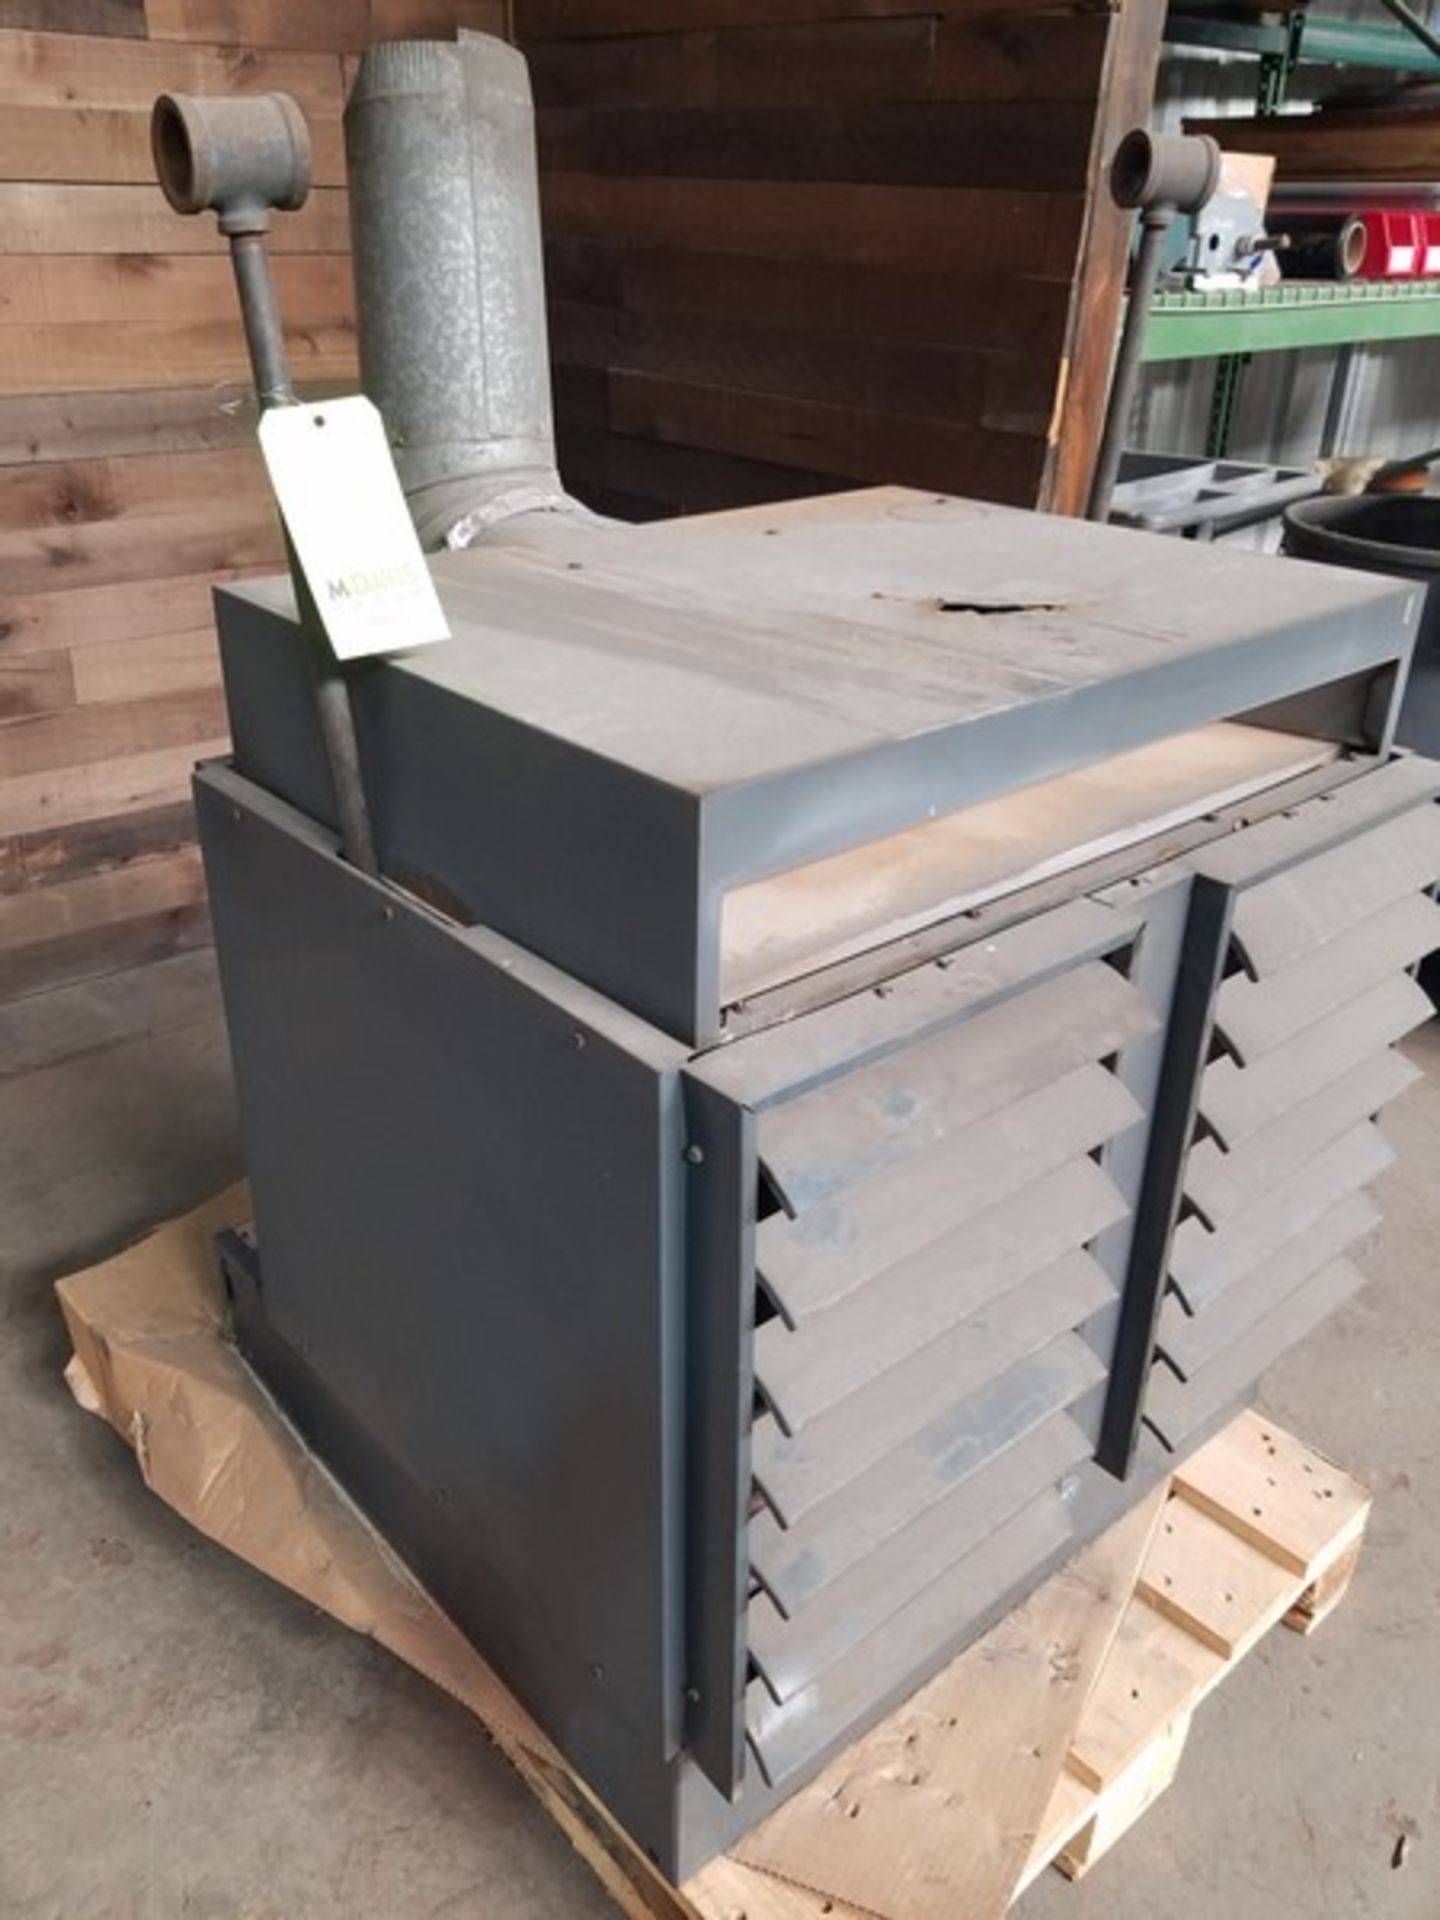 DNP Gas Warehouse Heater, Model 250UHE-2, S/N 18A20-6939 (Located Fort Worth, TX) (Loading Fee $ - Image 2 of 5